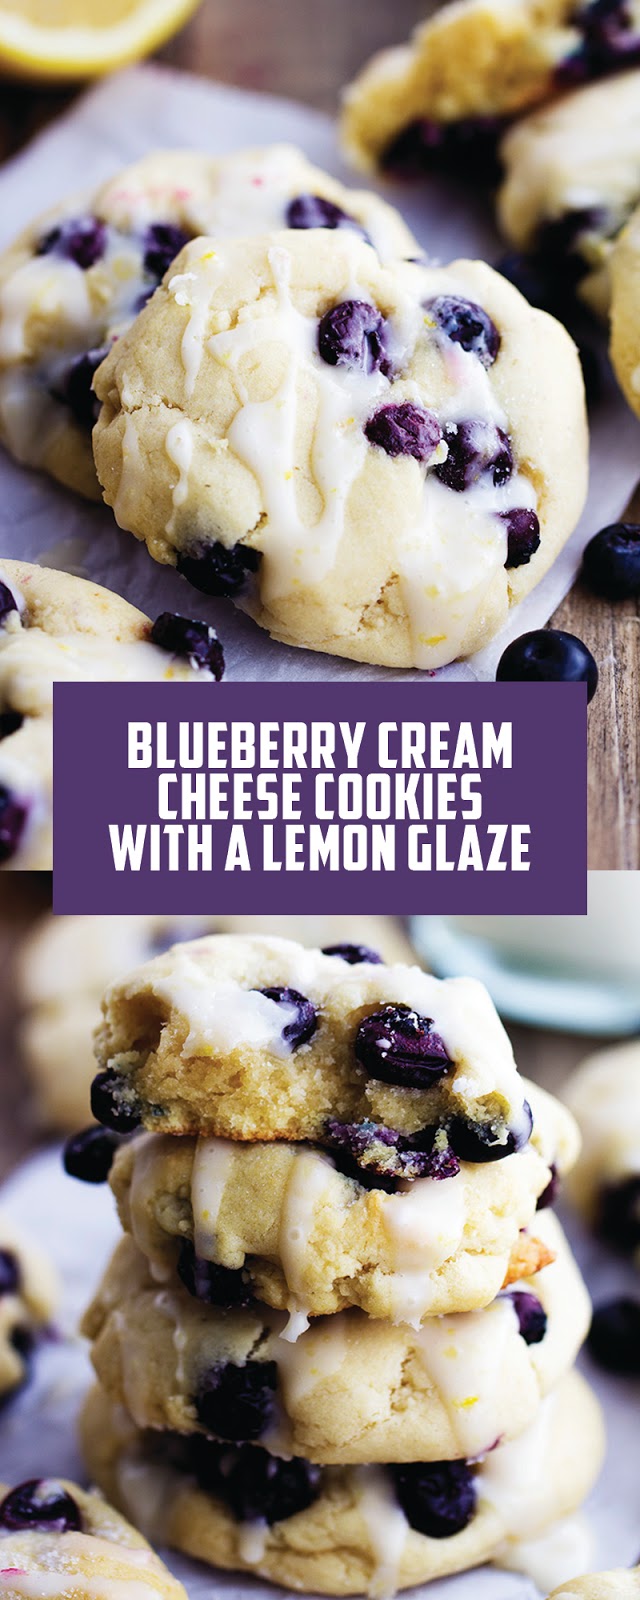 BLUEBERRY CREAM CHEESE COOKIES WITH A LEMON GLAZE